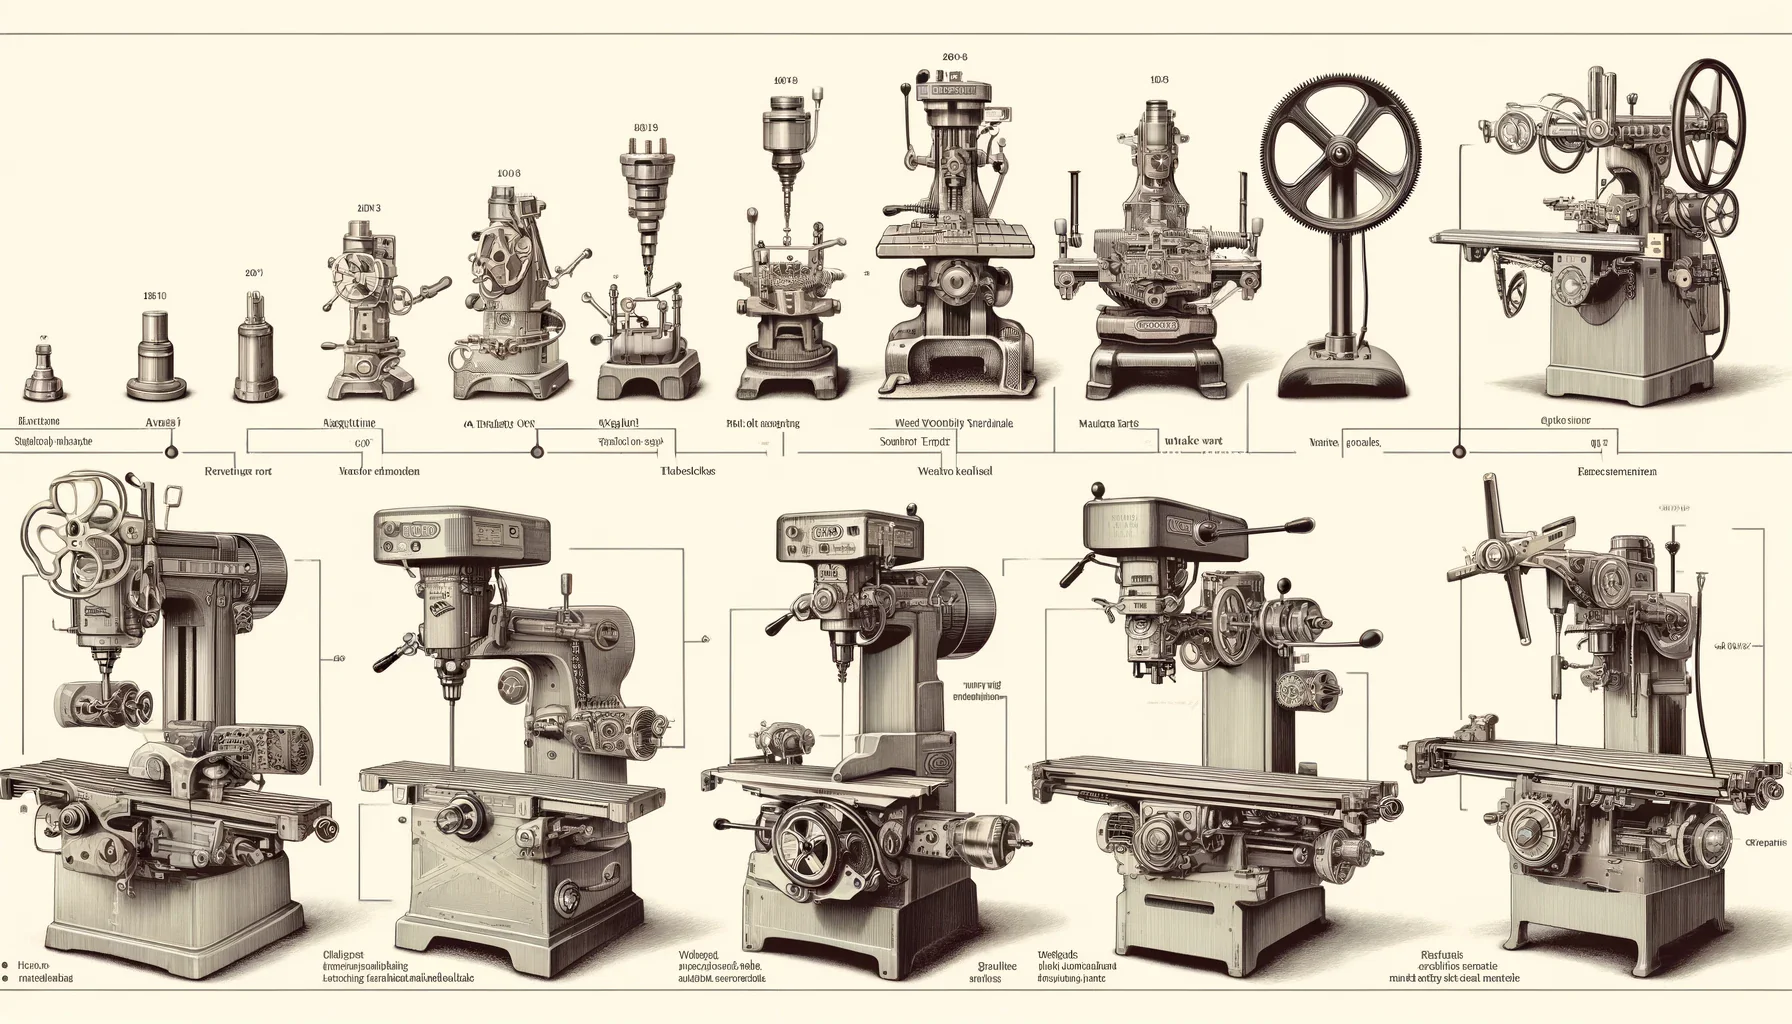 Graphic - The evolution of milling machines over the centuries.